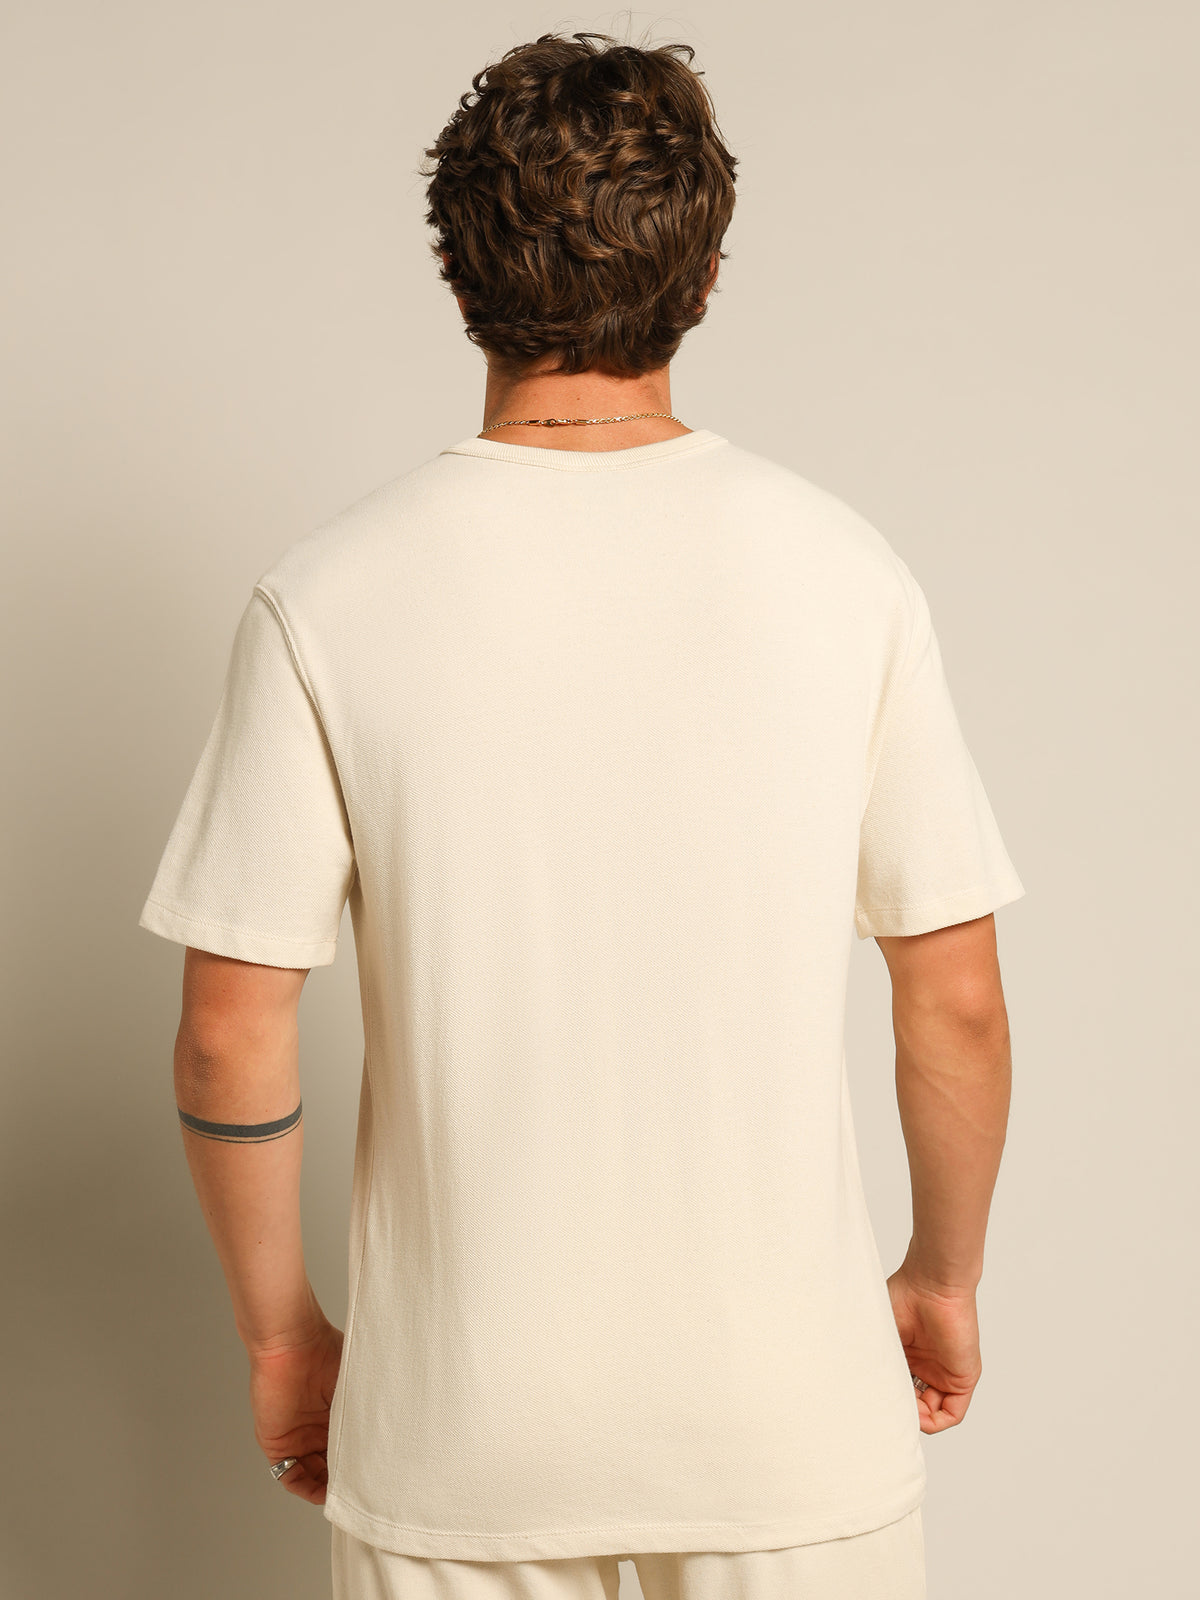 Re:bound Pique T-Shirt in Natural